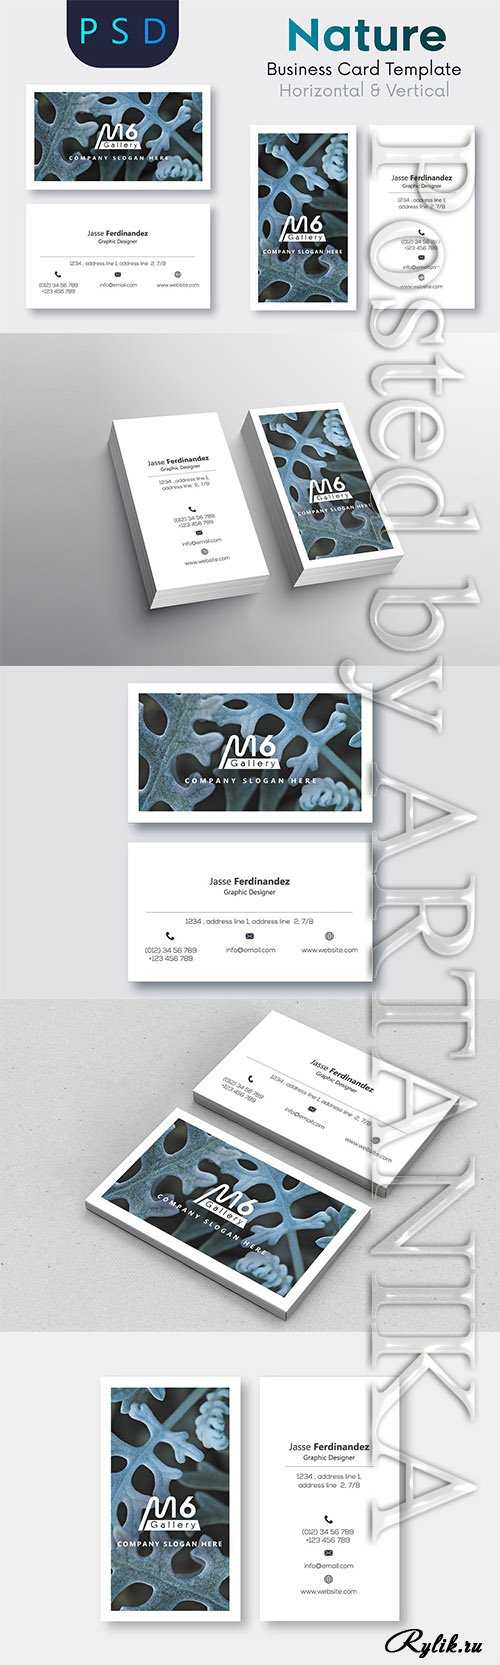 Визитная Карта – Nature Business Card Template Intended For Ss Card Template